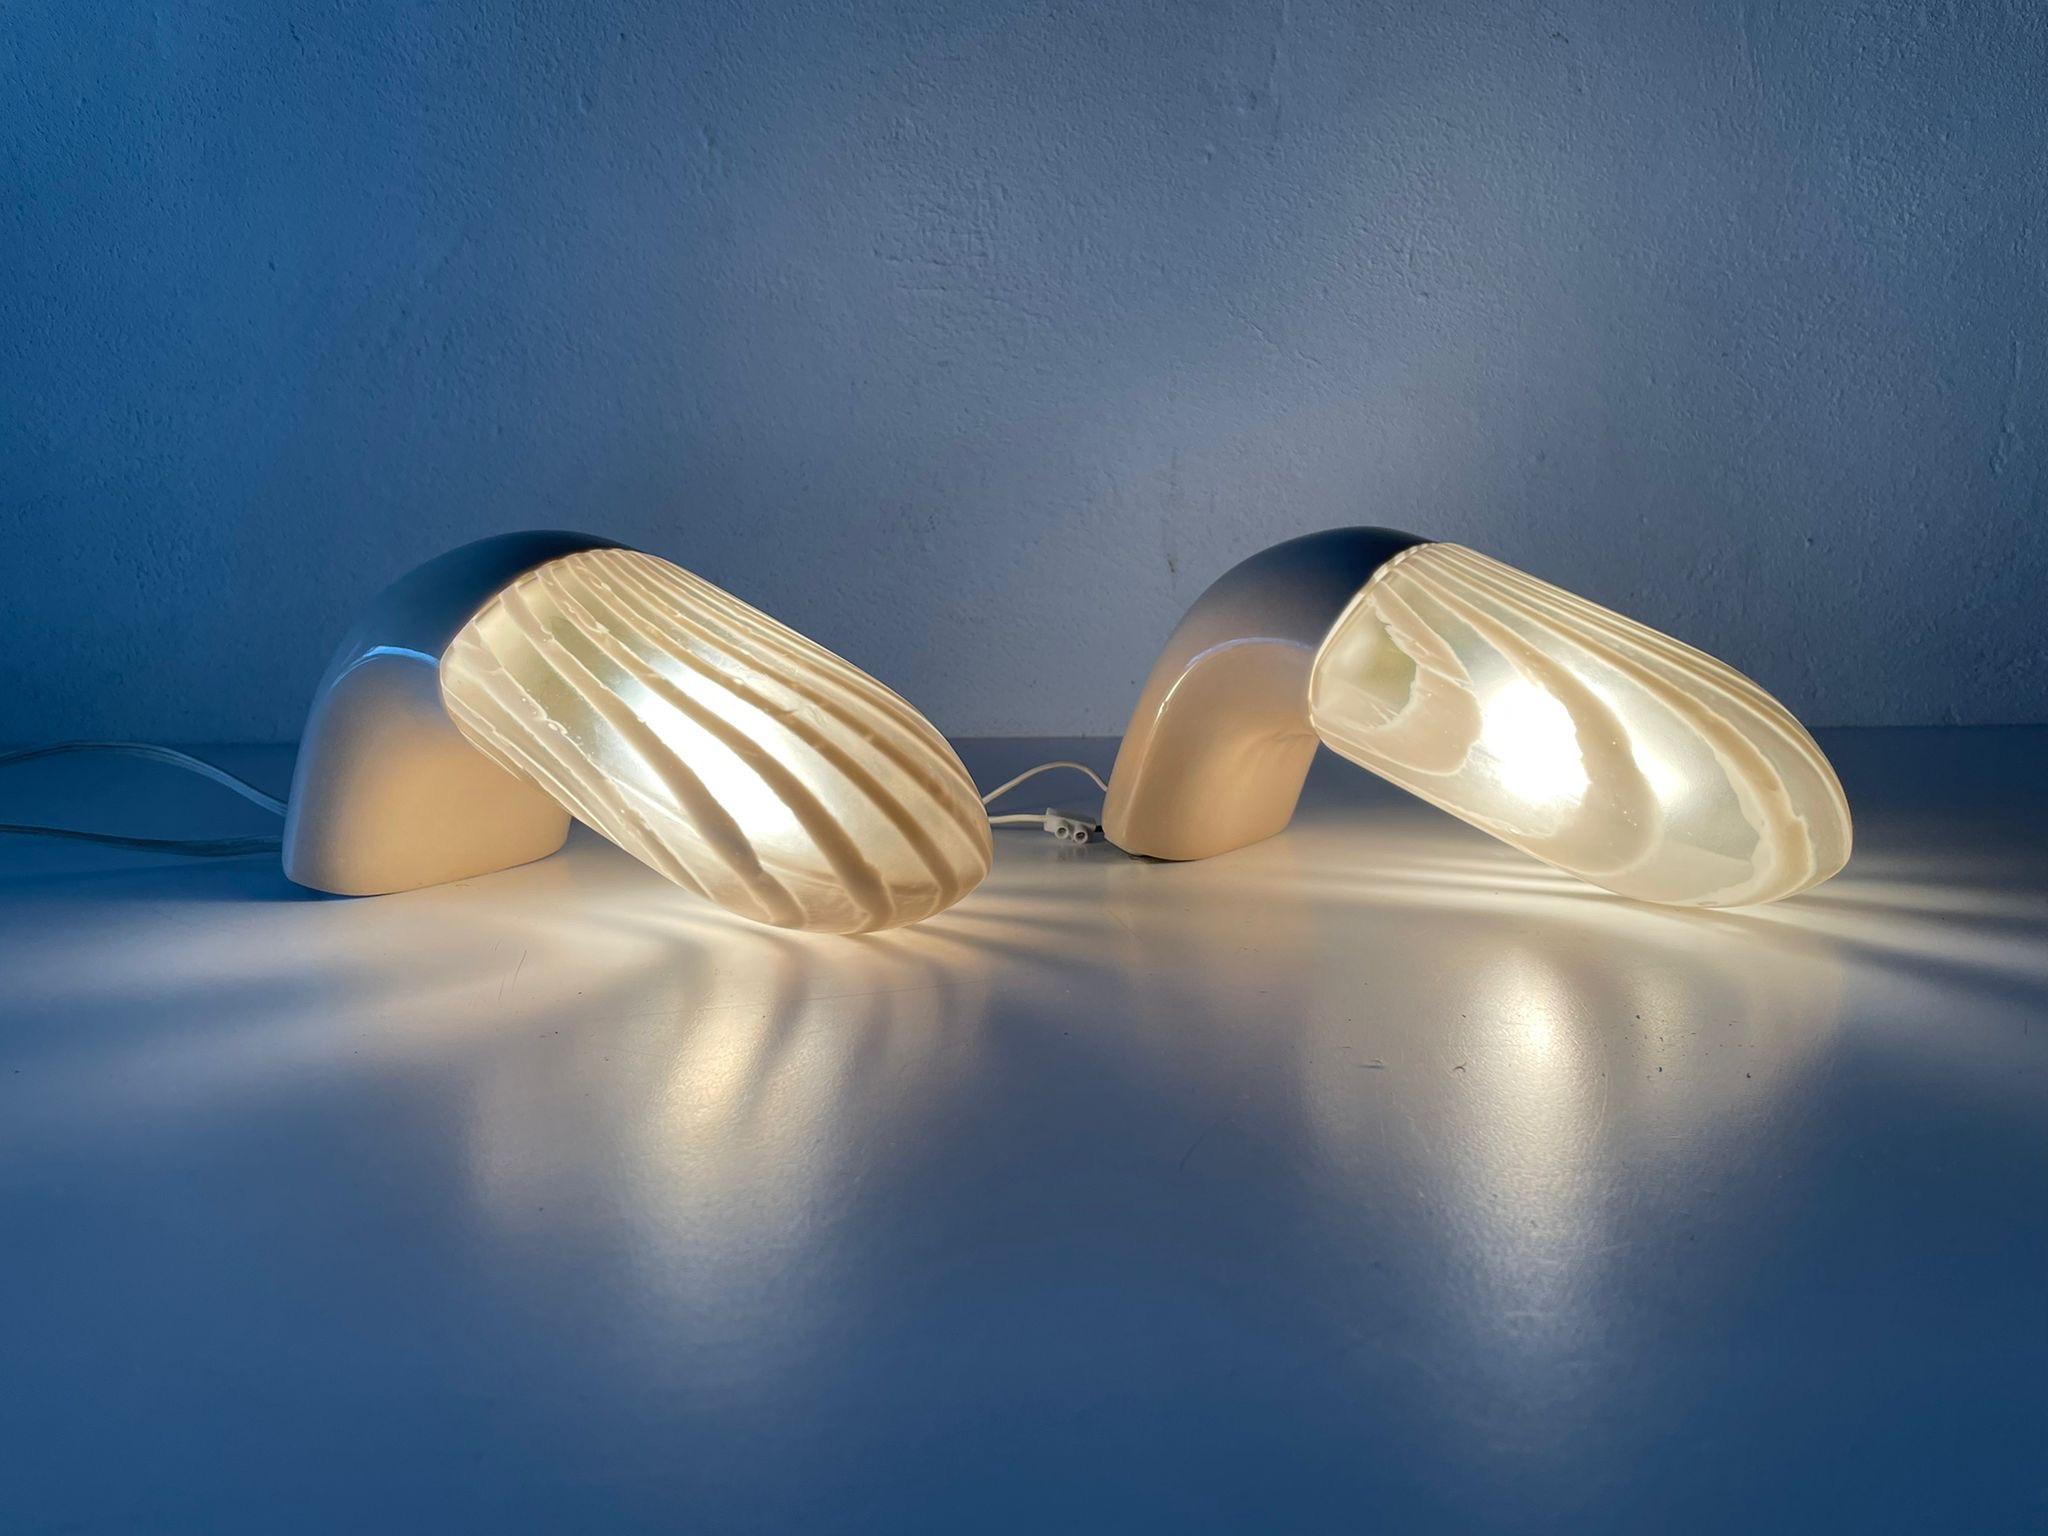 Porcelain Rare Pair of Bathroom Lamps by Peill Putzler, 1970s, Germany